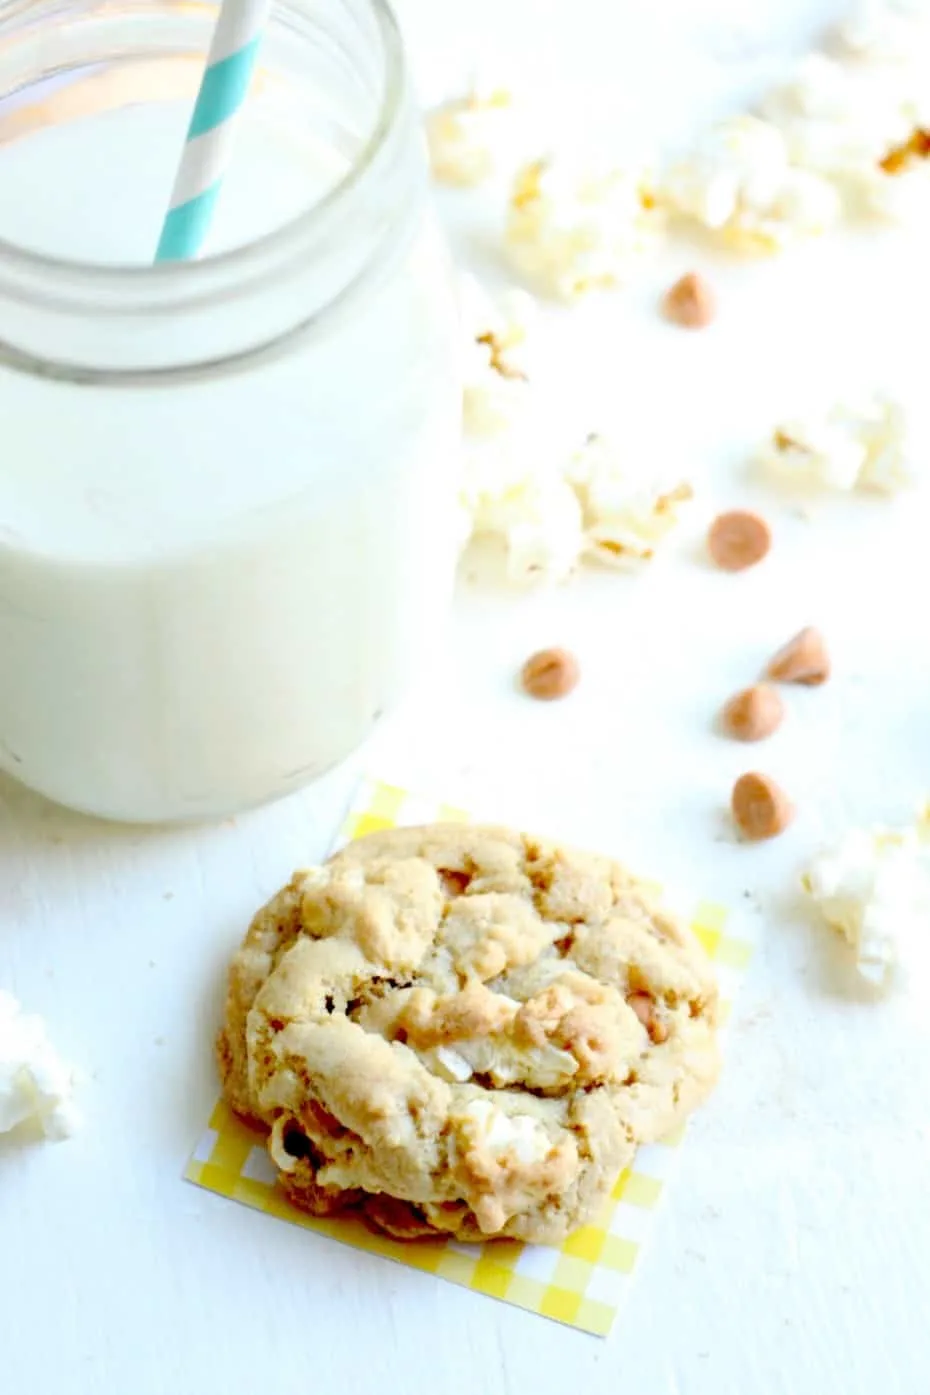 Delicious popcorn cookies with butterscotch chips and a glass of milk